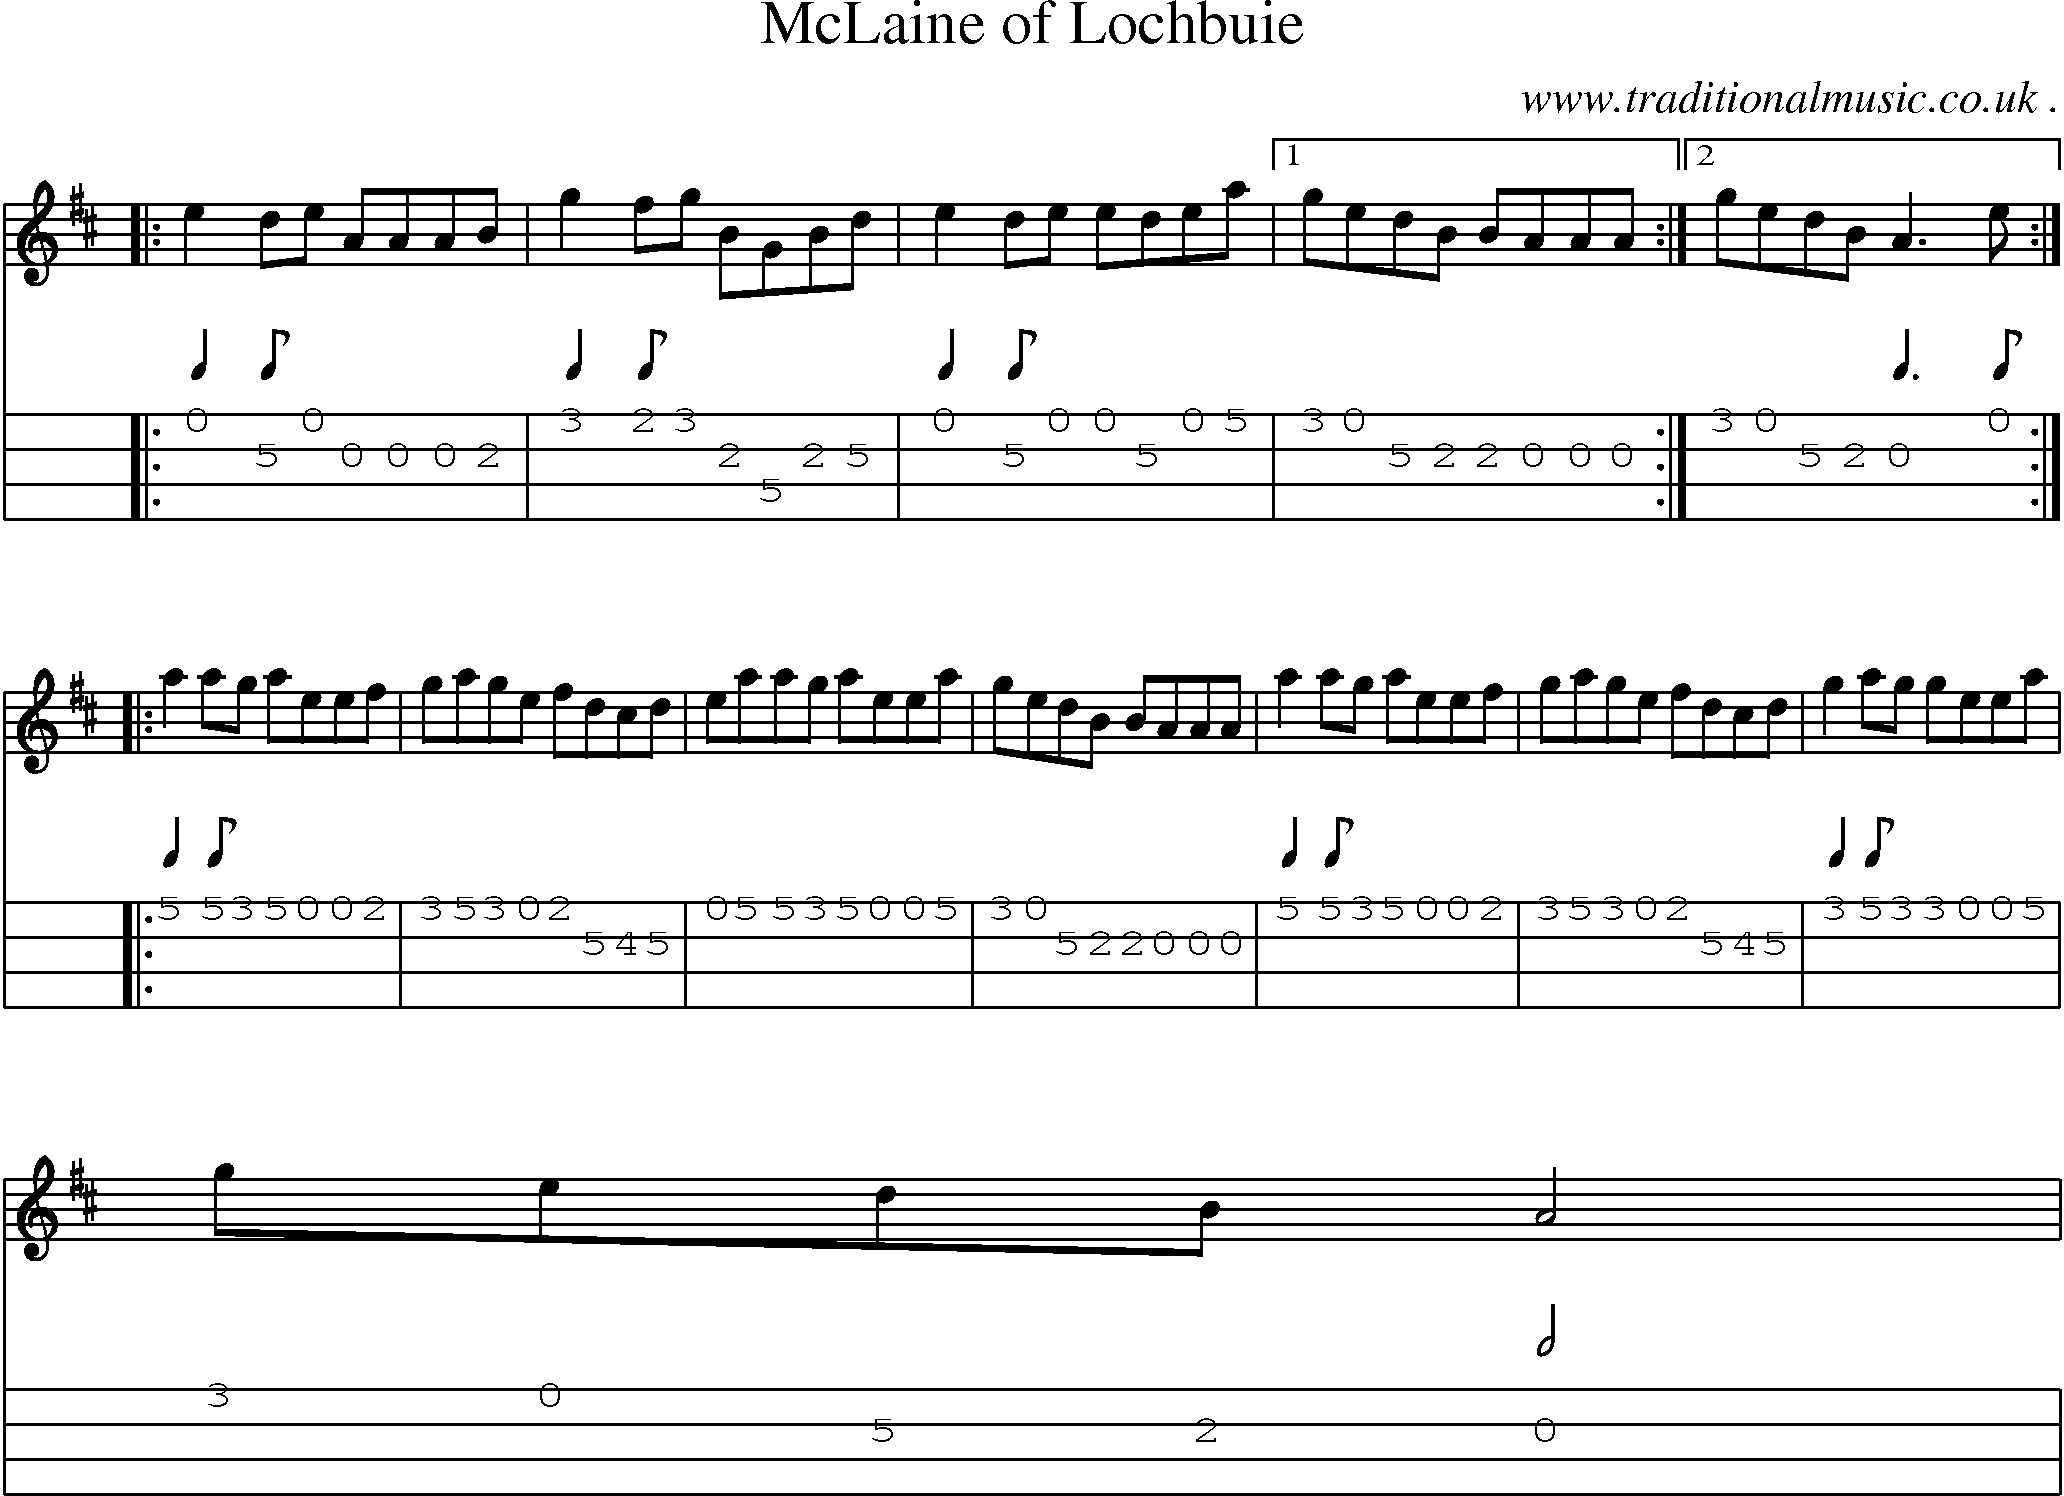 Sheet-music  score, Chords and Mandolin Tabs for Mclaine Of Lochbuie